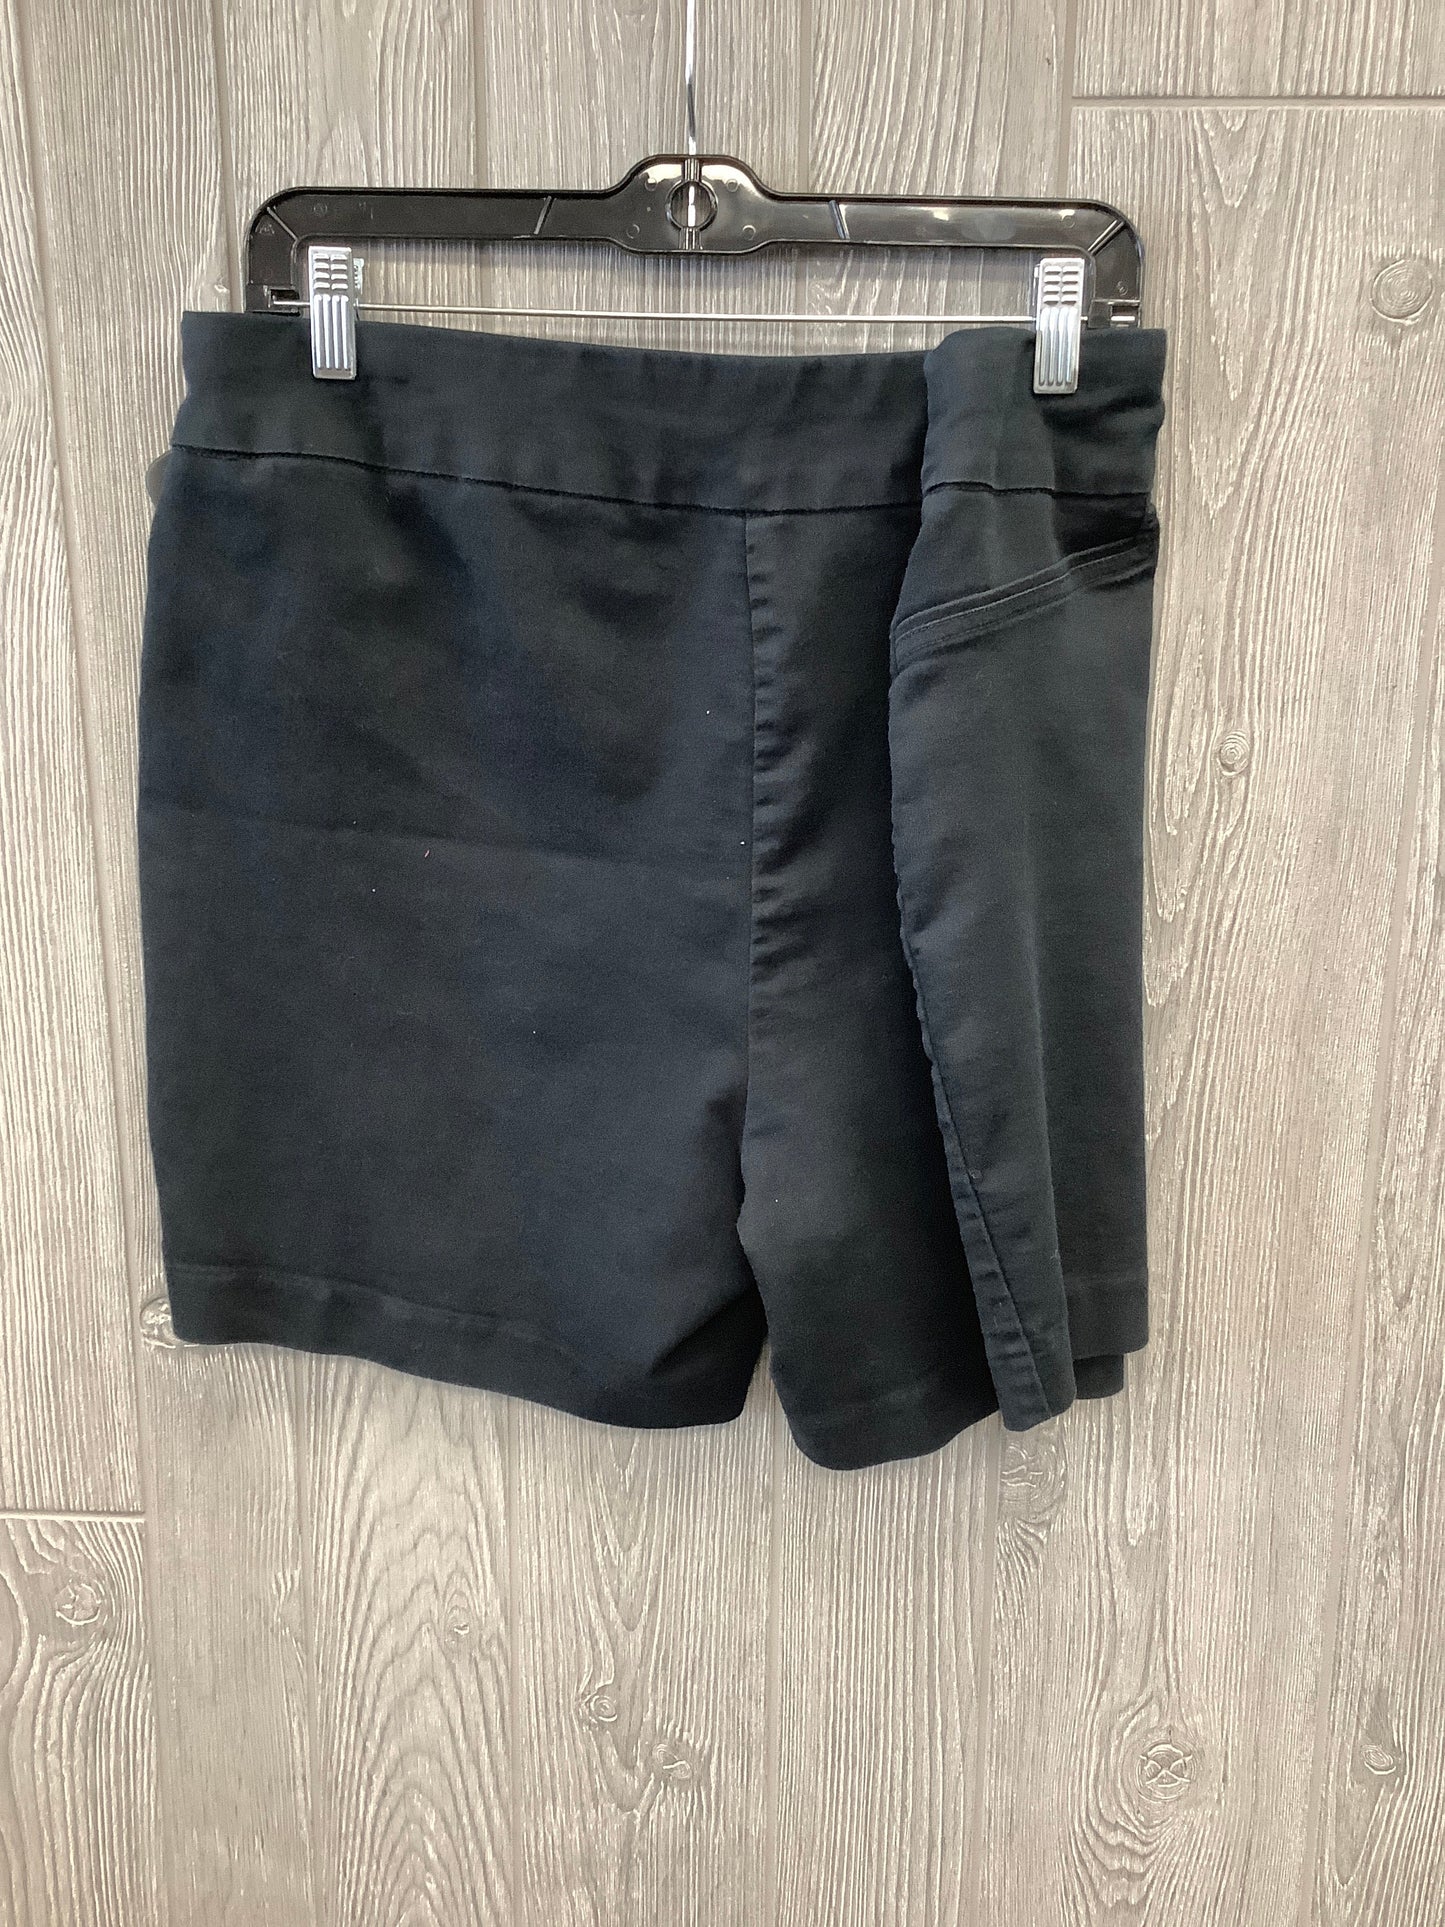 Shorts By Croft And Barrow  Size: 16